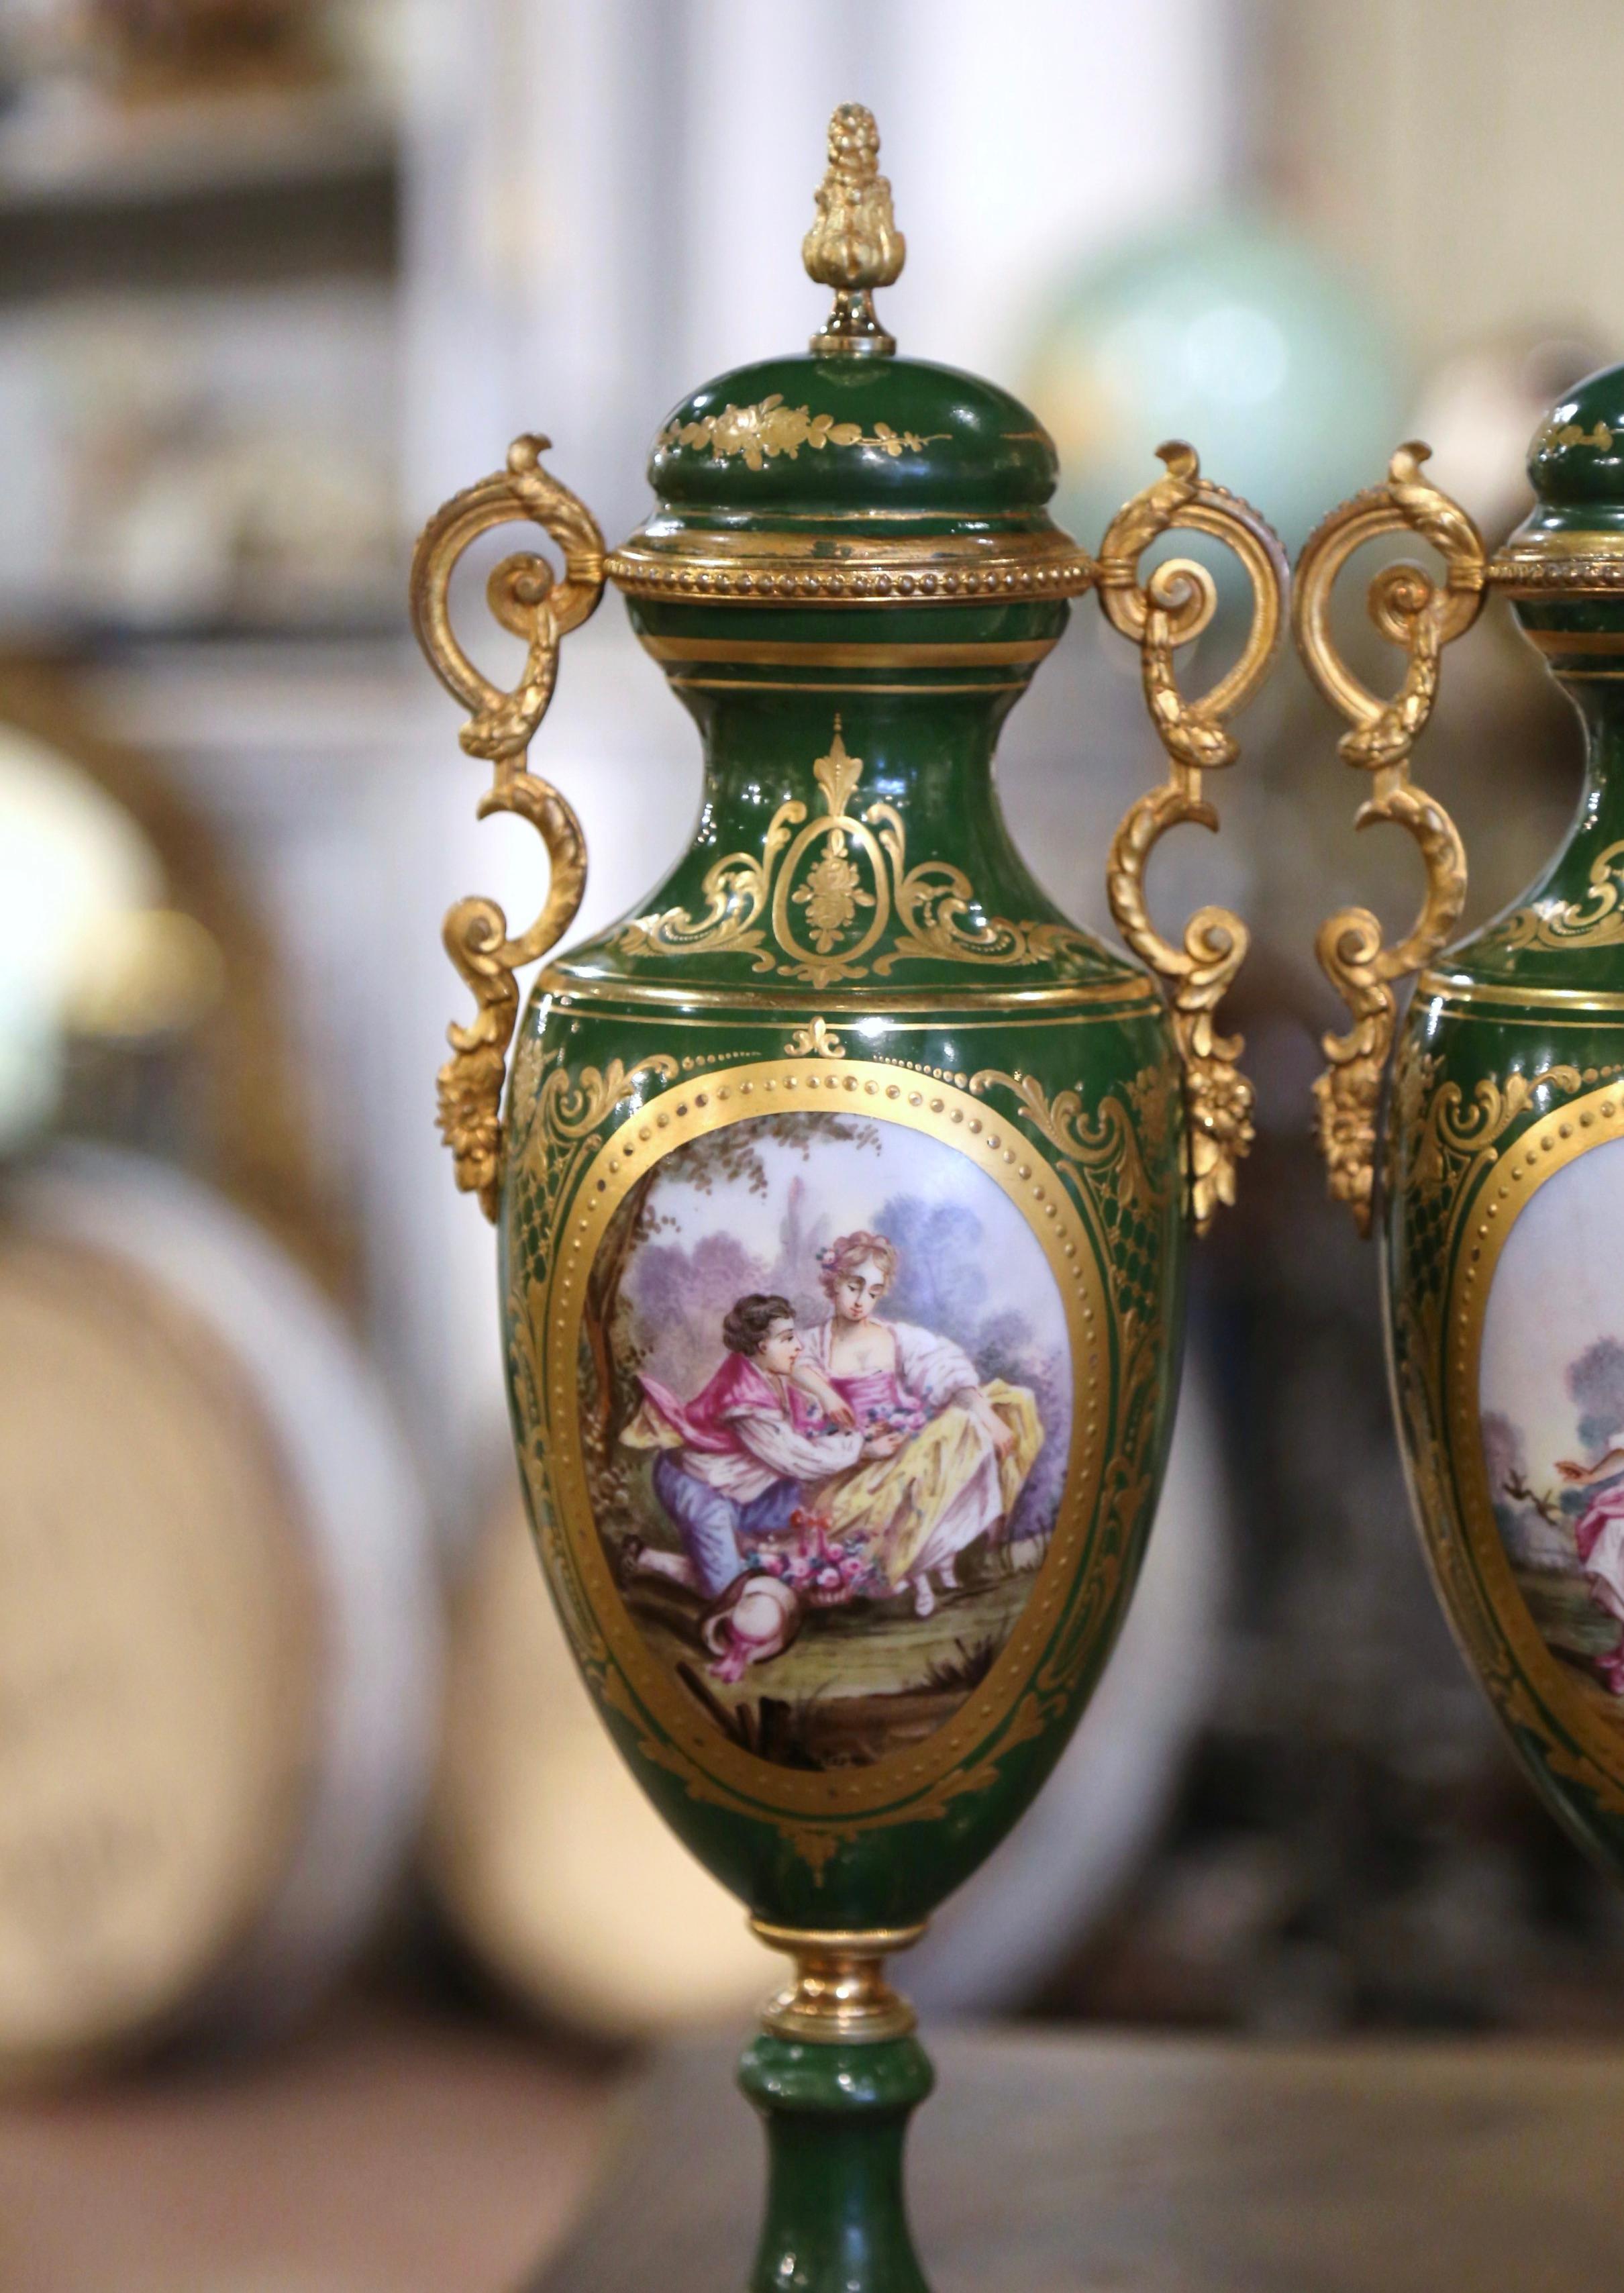 Pair of 19th Century French Sevres Gilt Metal and Painted Porcelain Covered Urns In Excellent Condition For Sale In Dallas, TX